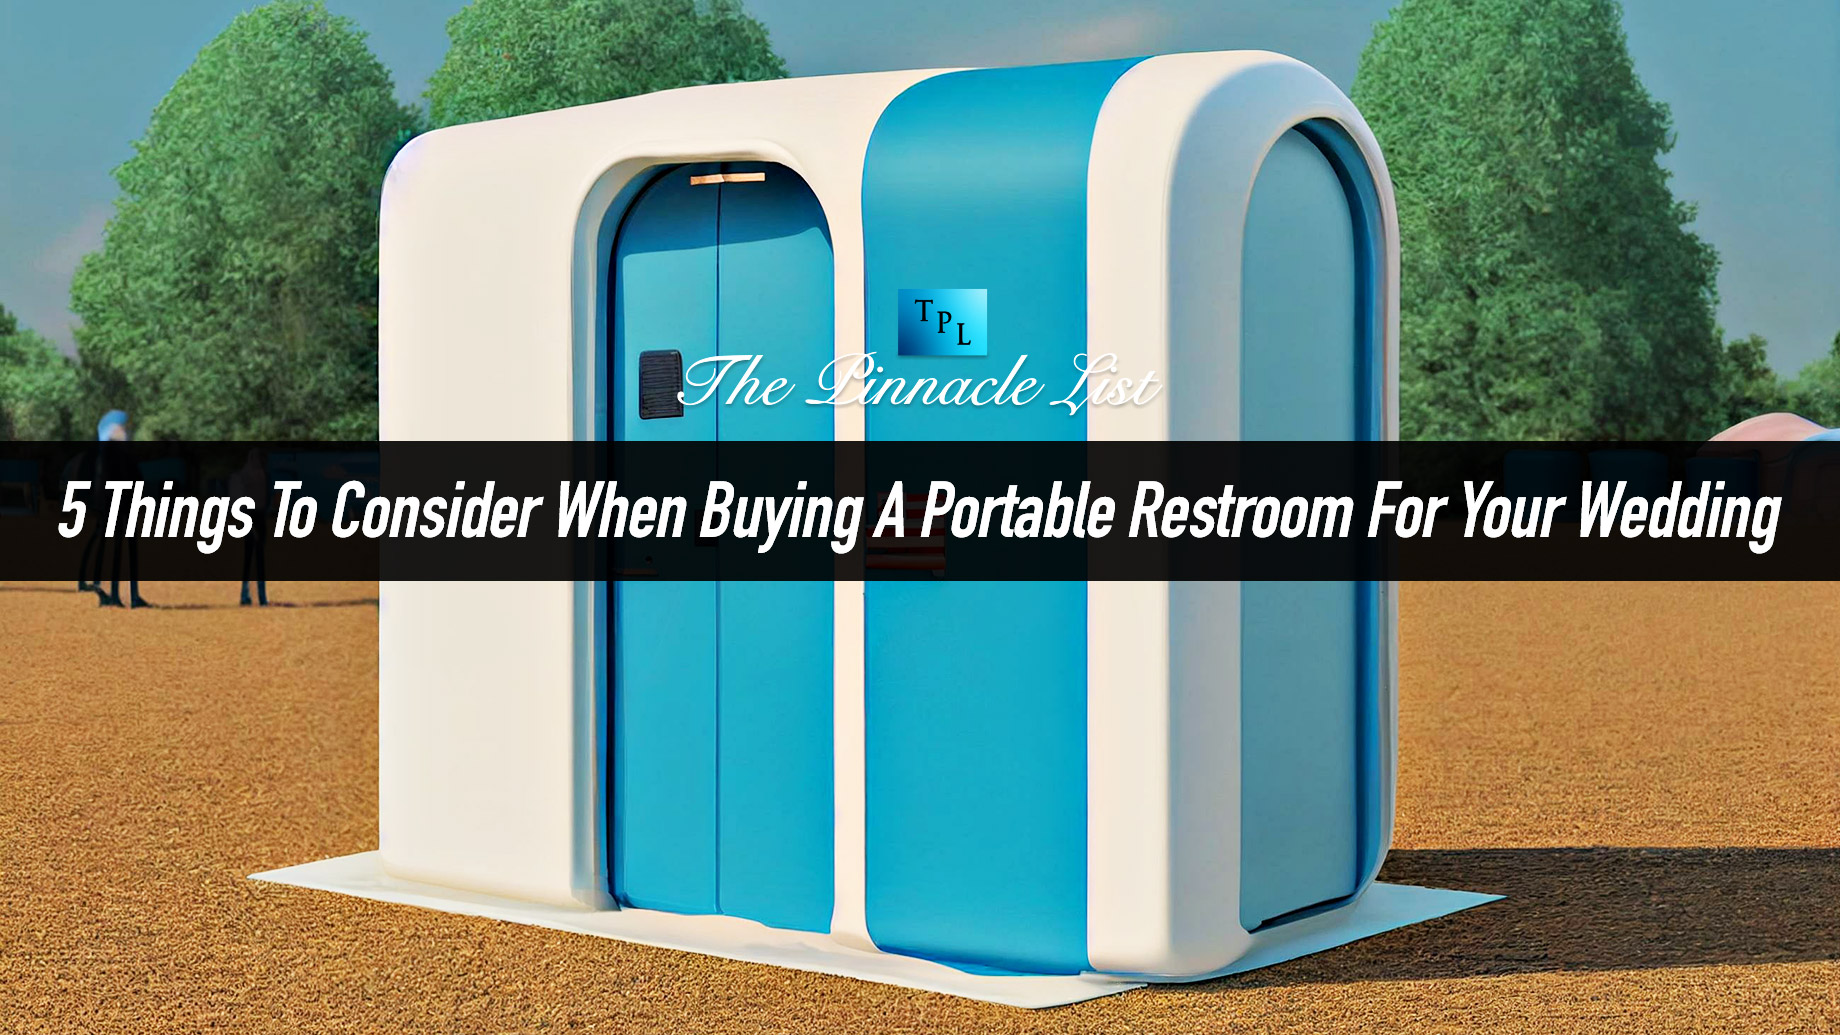 5 Things To Consider When Buying A Portable Restroom For Your Wedding